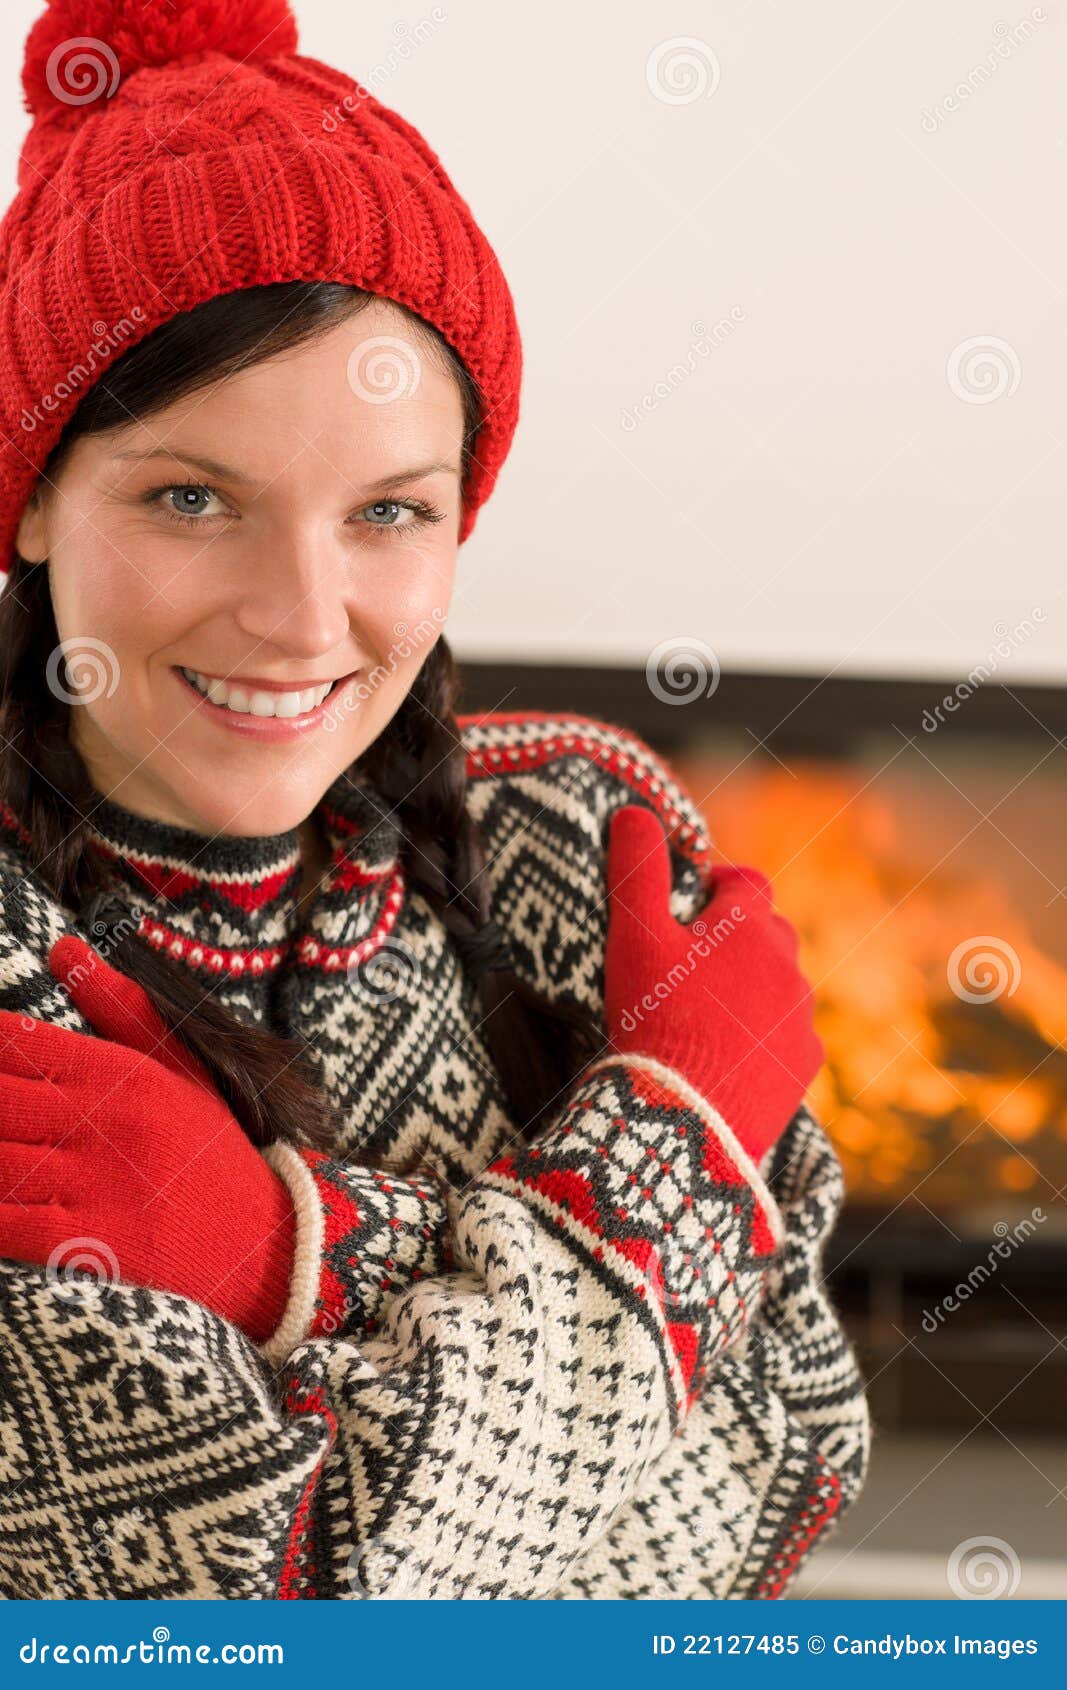 Fireplace Winter Xmas Young Woman Wear Sweather Stock Image - Image of ...